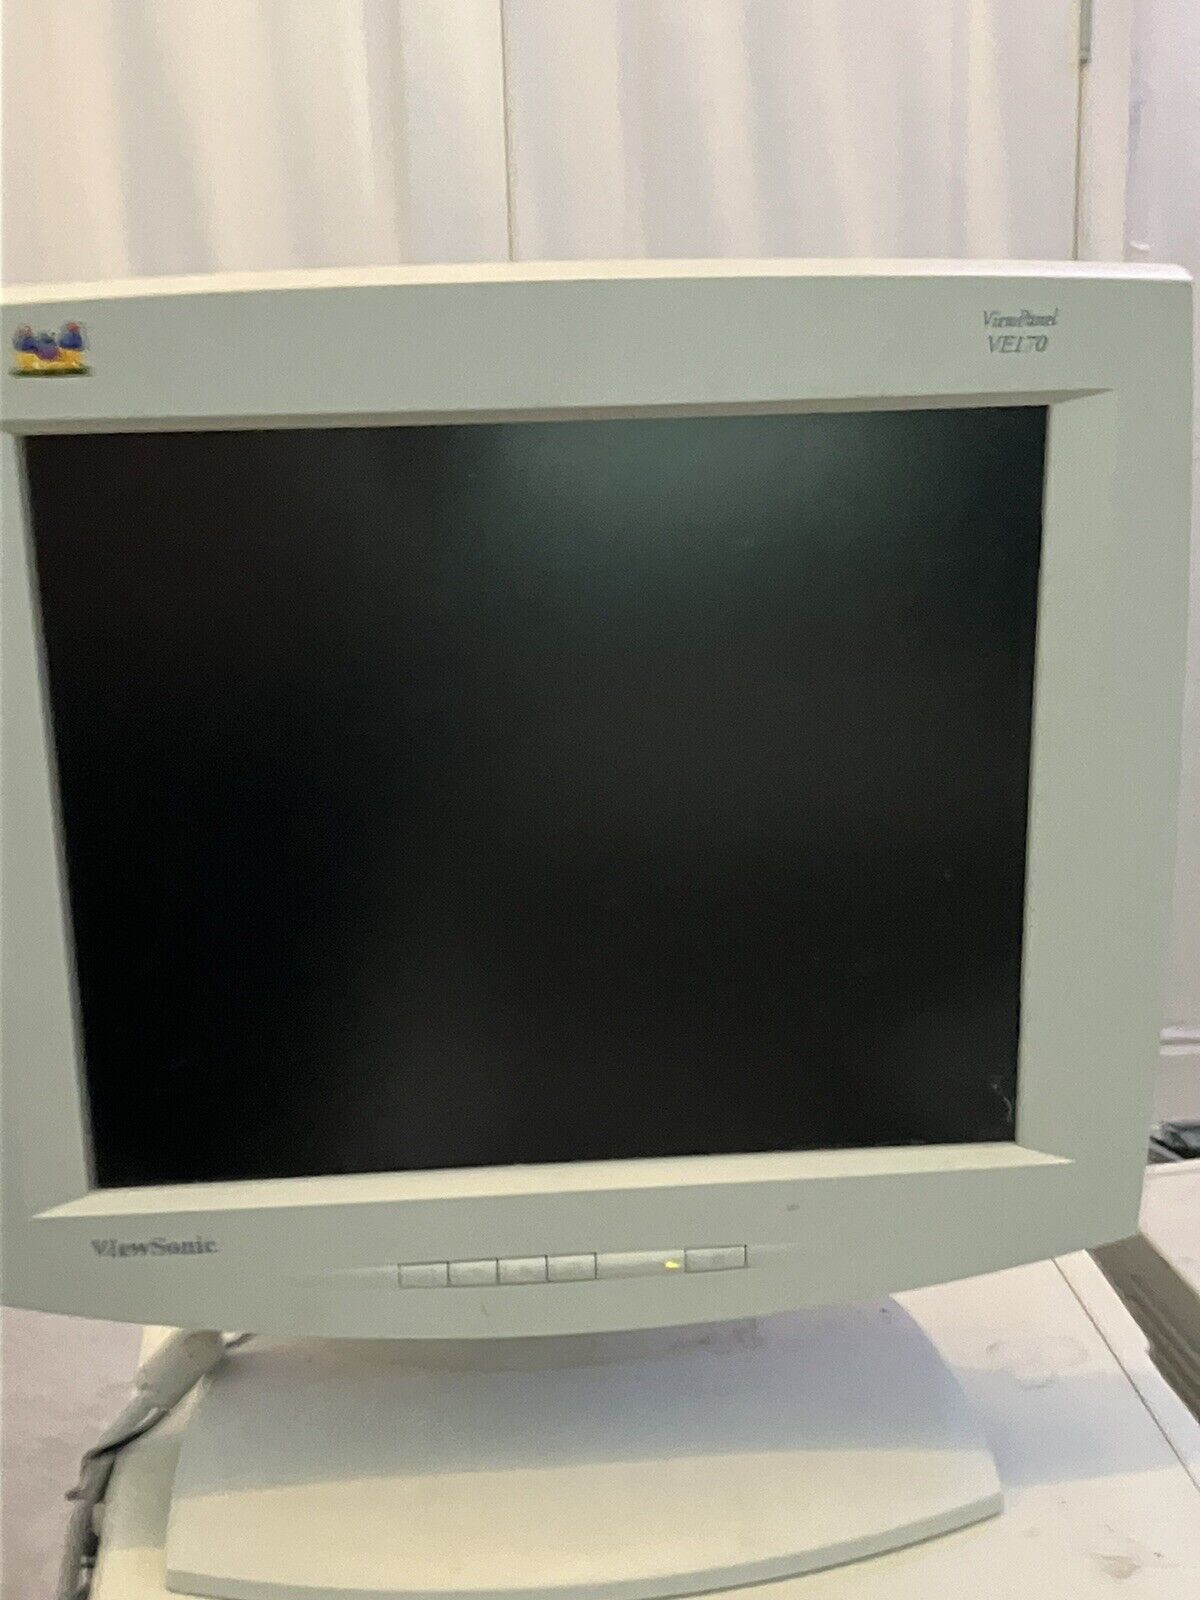 Viewsonic Monitor Flat Panel *TESTED* Used